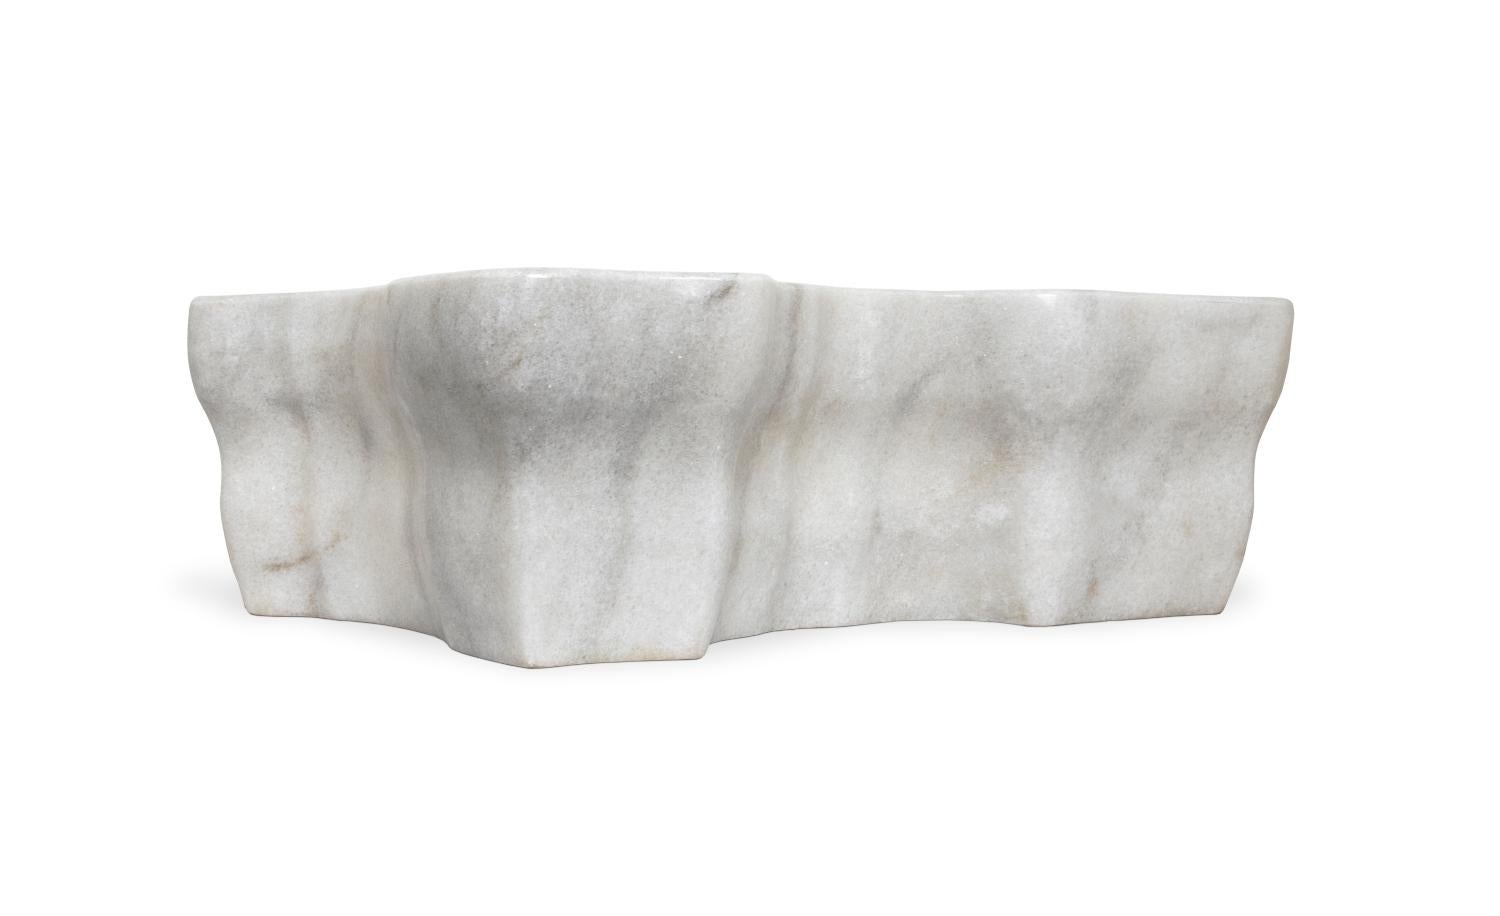 The Eden stone vessel sink is inspired by the shape of a tree stump. This beautiful irregular shaped piece is carved from our finest marble selection. When looking for the perfect element to distinguish your bathroom project, the Eden stone vessel